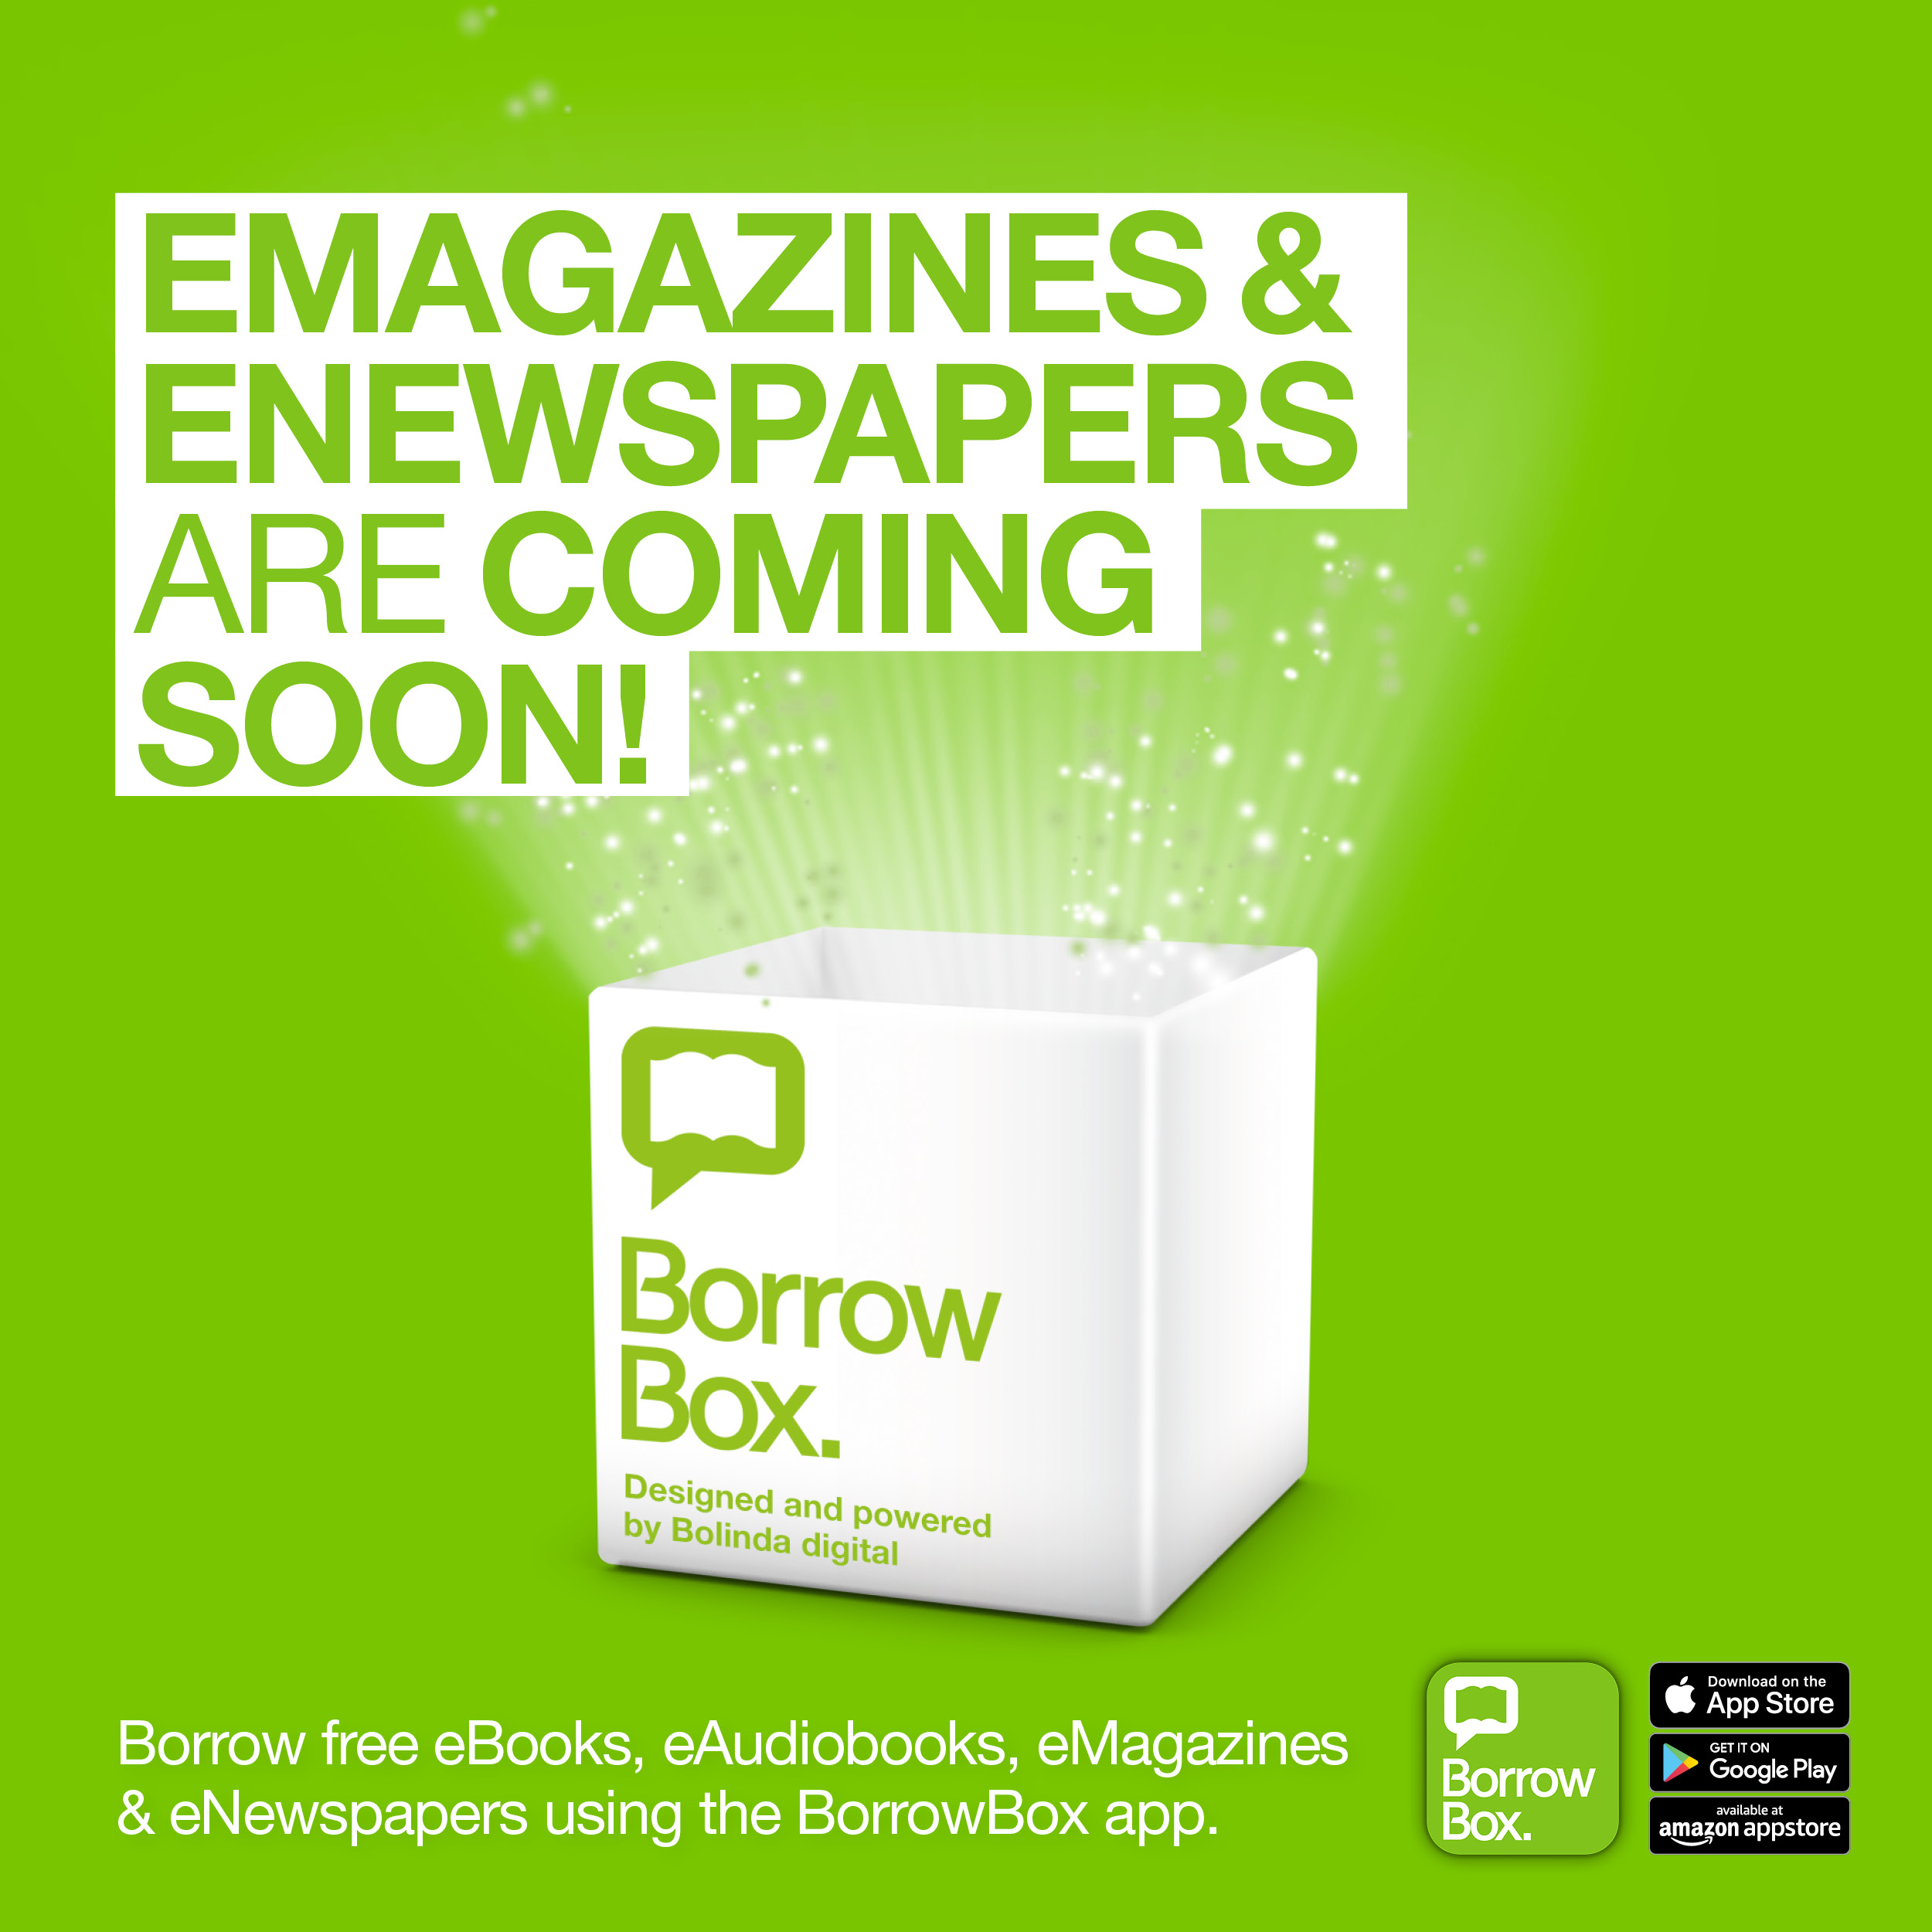 Newspapers and magazines will soon be available on BorrowBox 